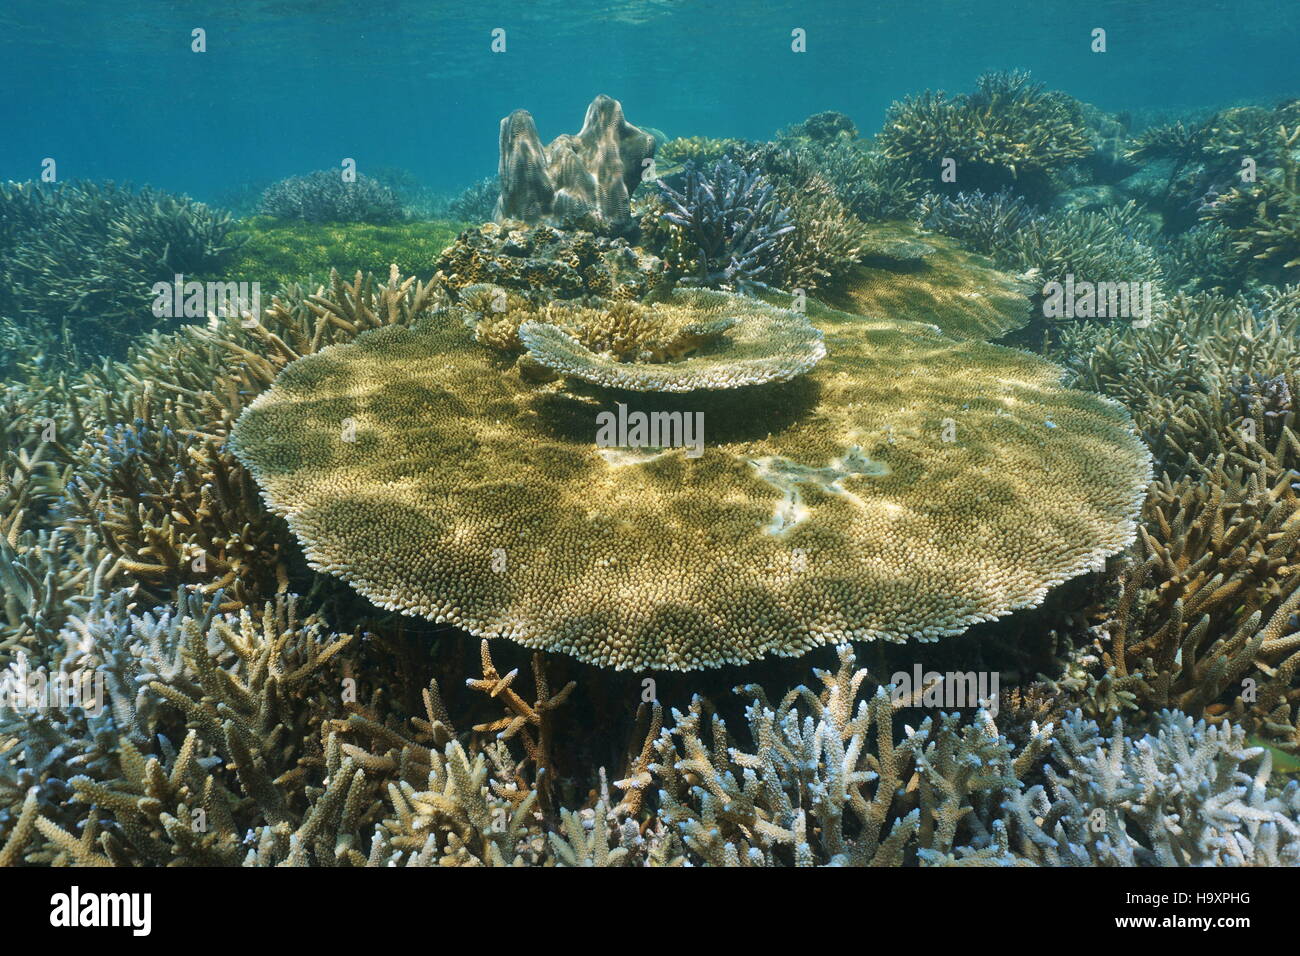 Underwater marine life, Acropora table coral on an healthy reef, New Caledonia, south Pacific ocean Stock Photo